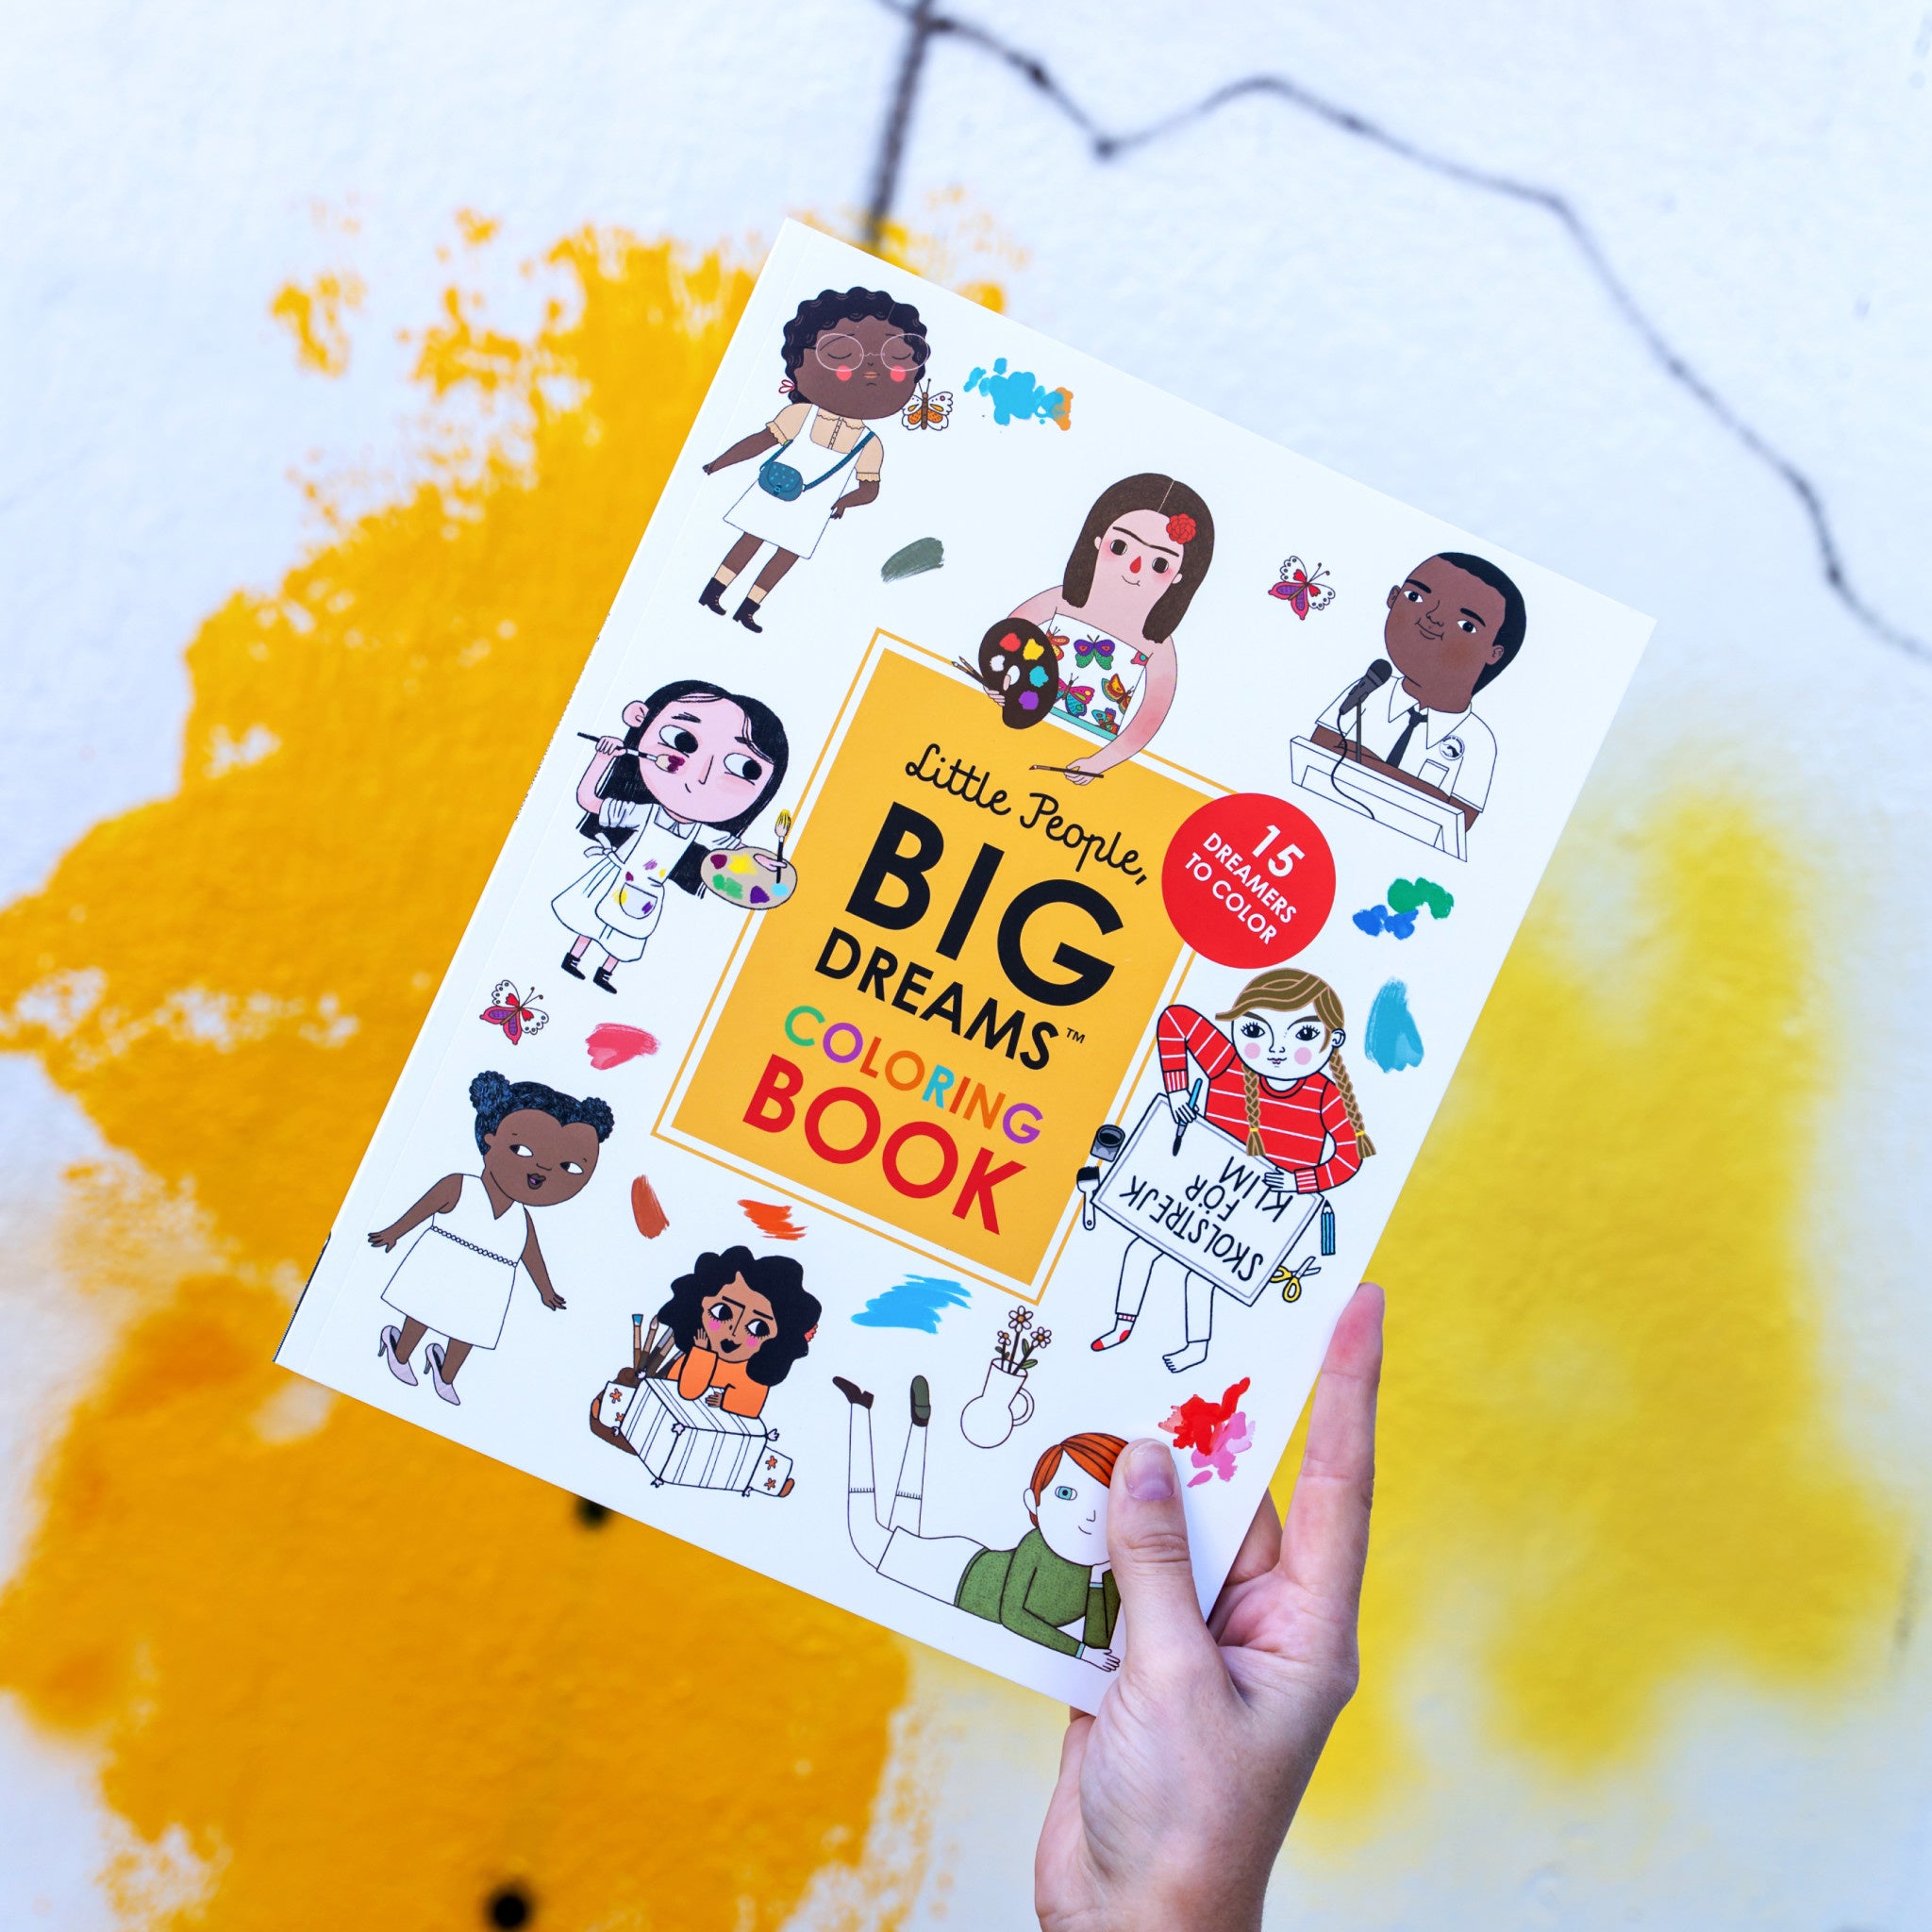 Little People, BIG DREAMS Sticker Activity Book: With 100 Stickers [Book]